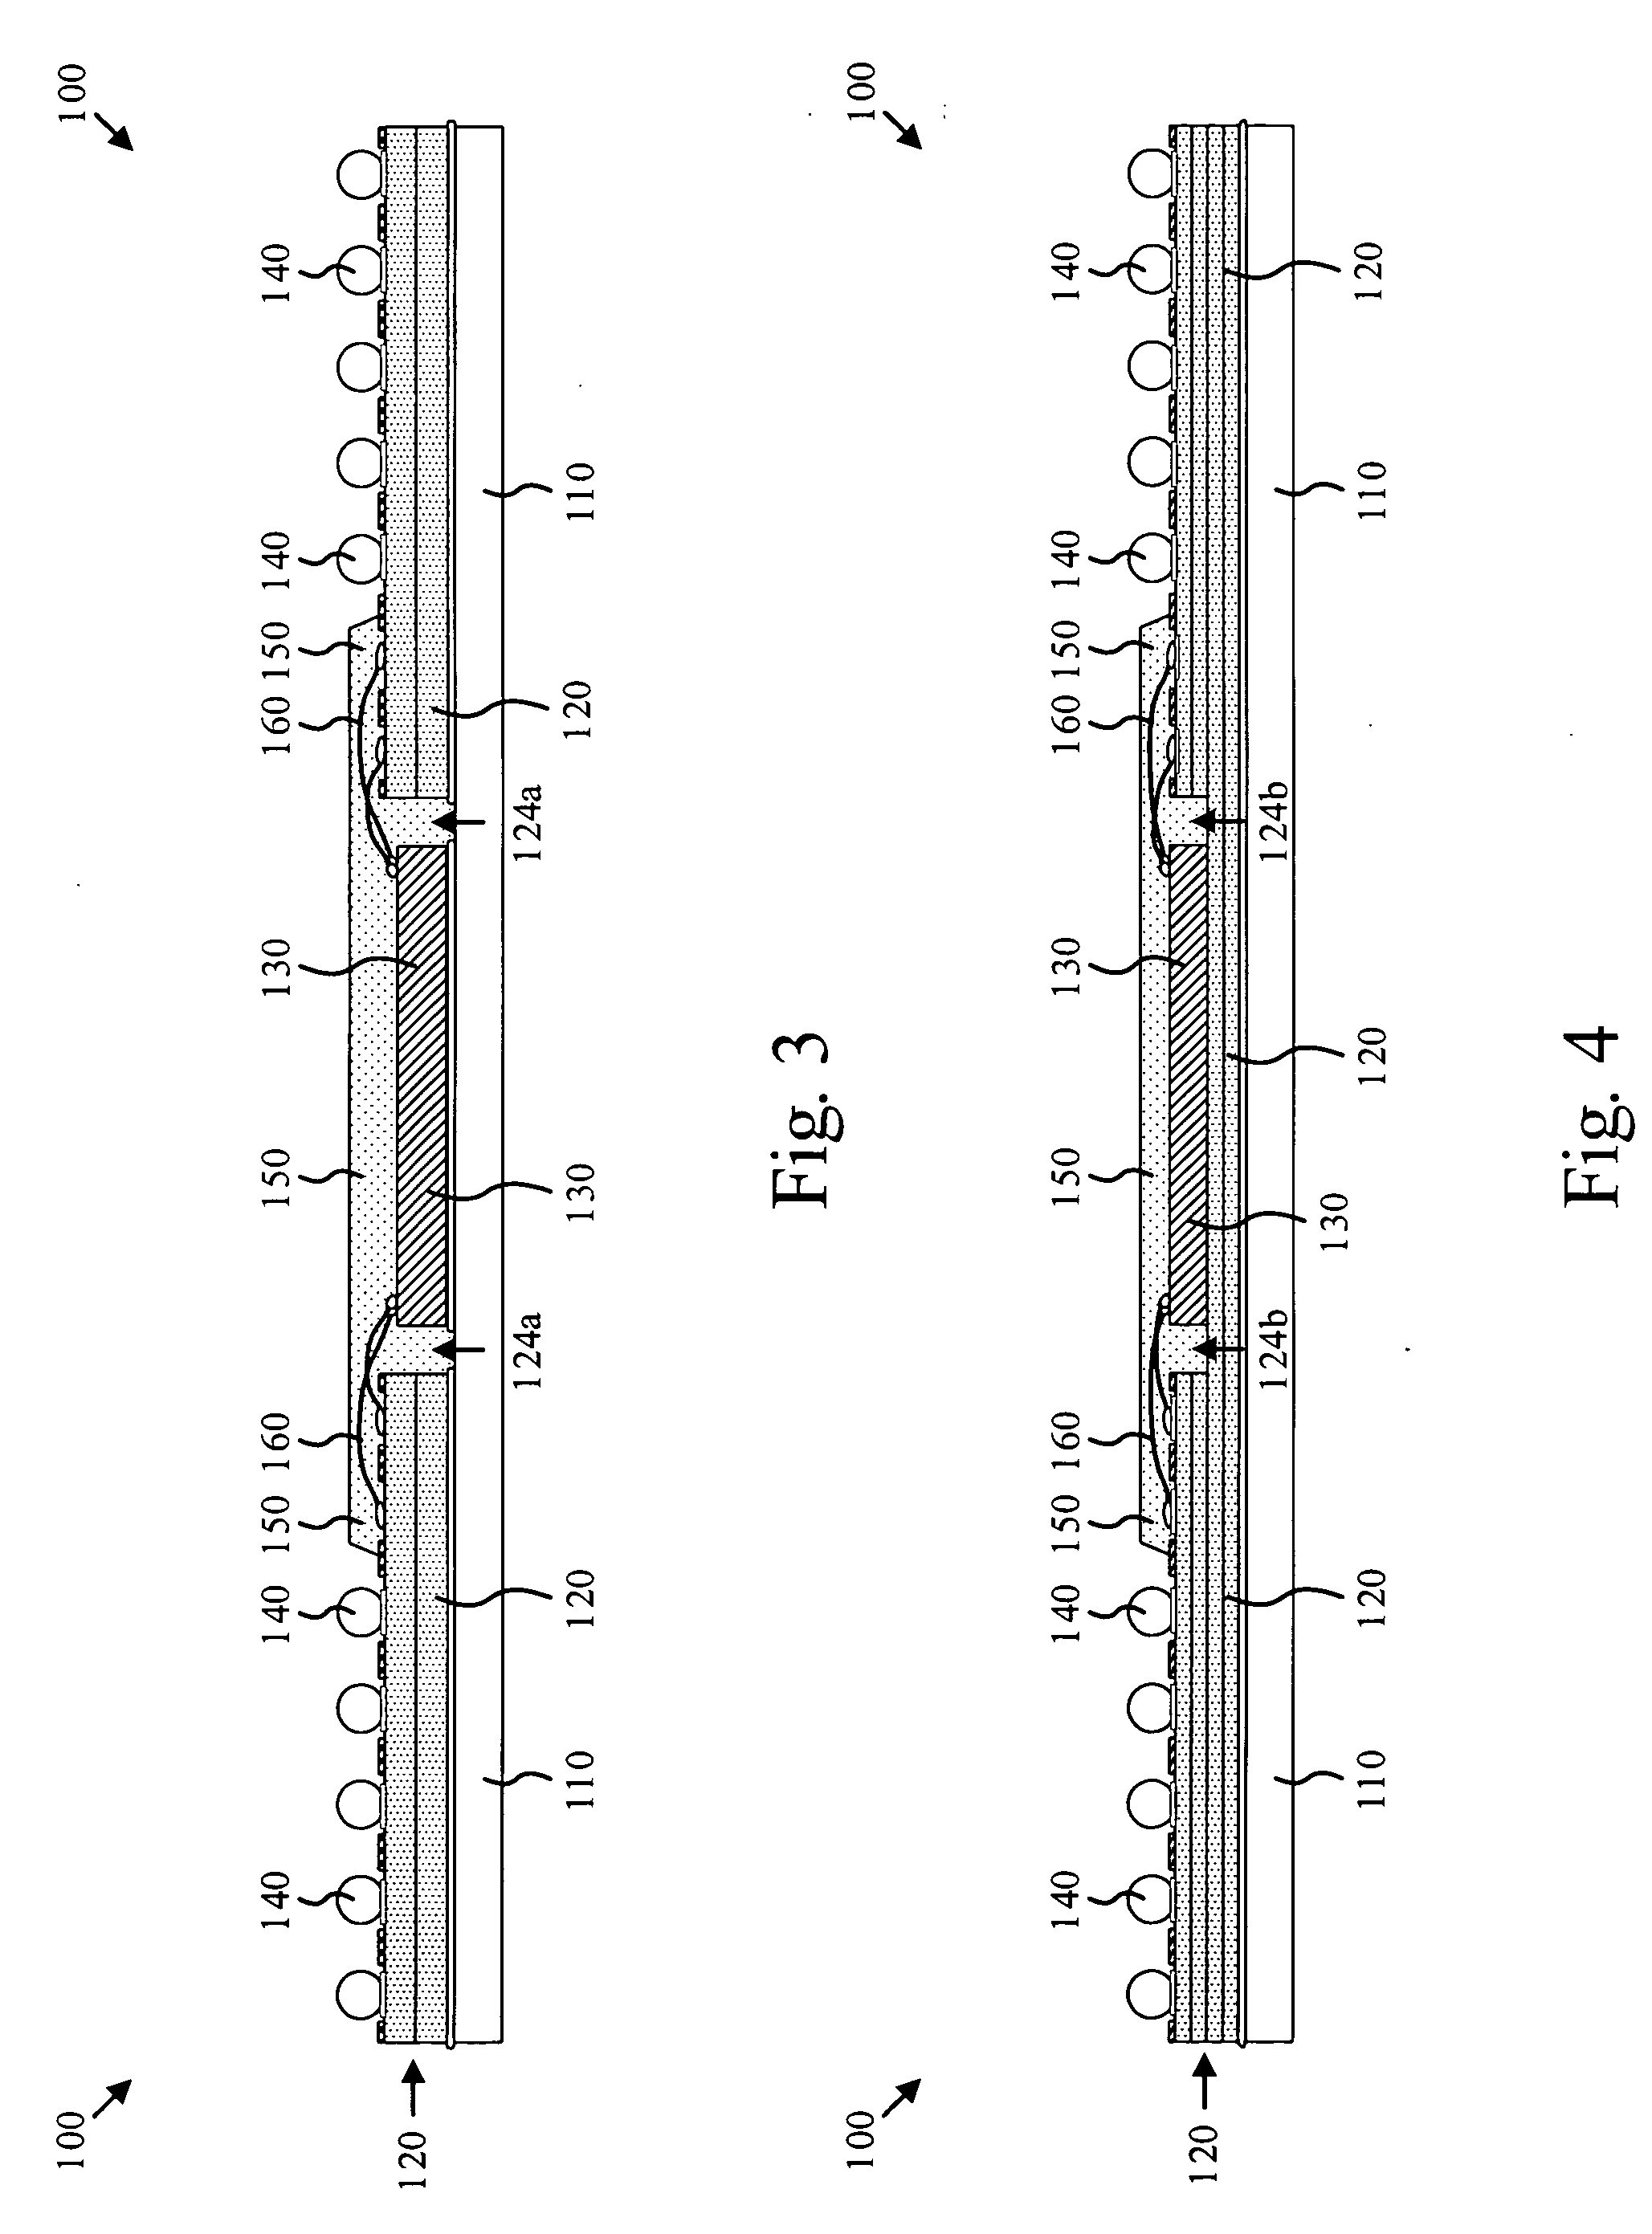 Integrated circuit carrier apparatus method and system